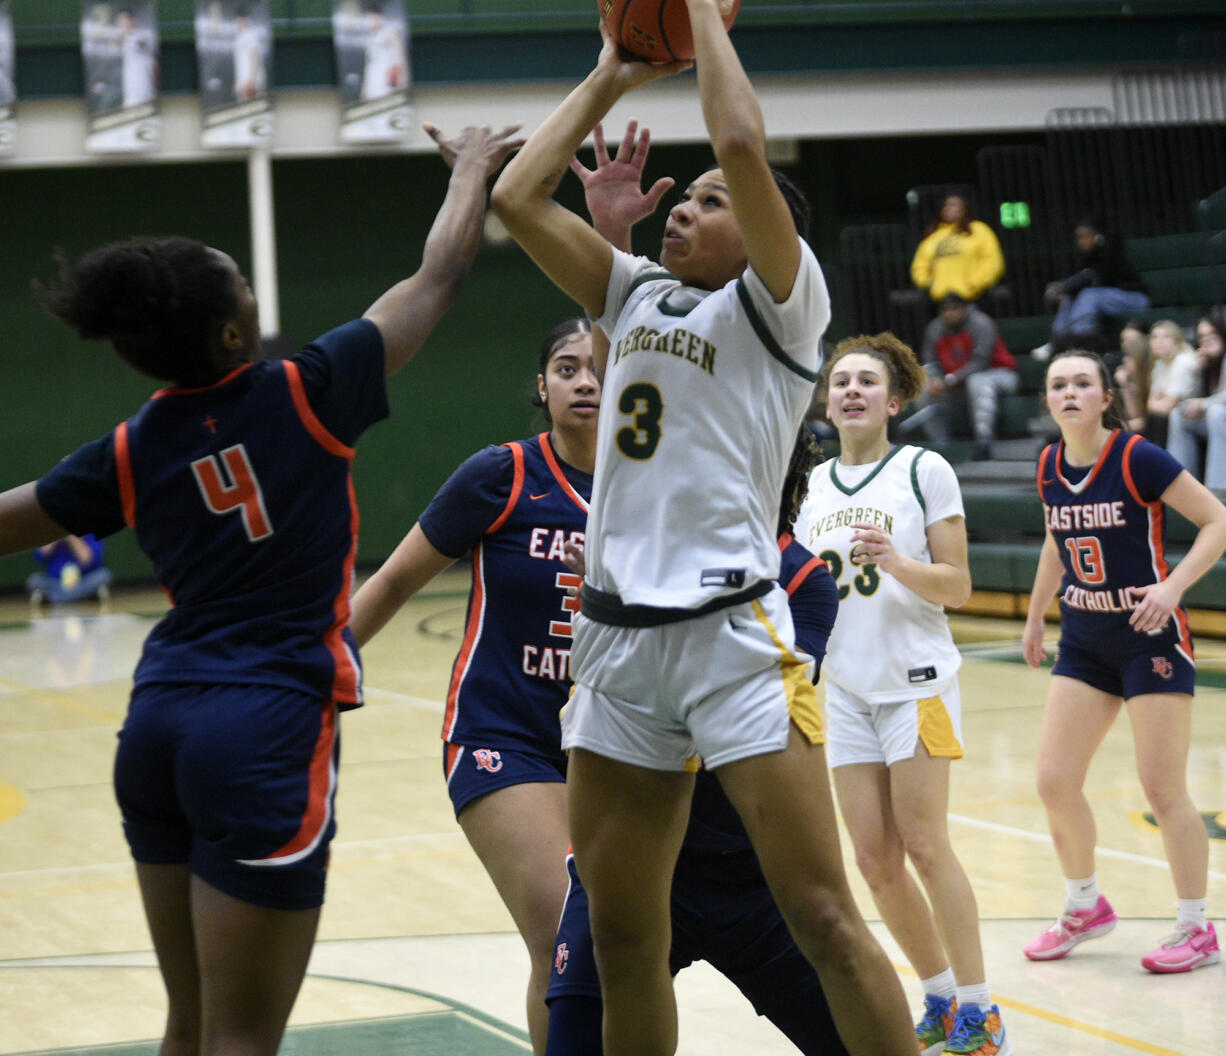 Alexis Echols (3) of Evergreen takes a shot against Linda Nduka (4) of Eastside Catholic in a Class 3A state playoff girls basketball game at Evergreen High School on Tuesday, Feb. 20, 2024.